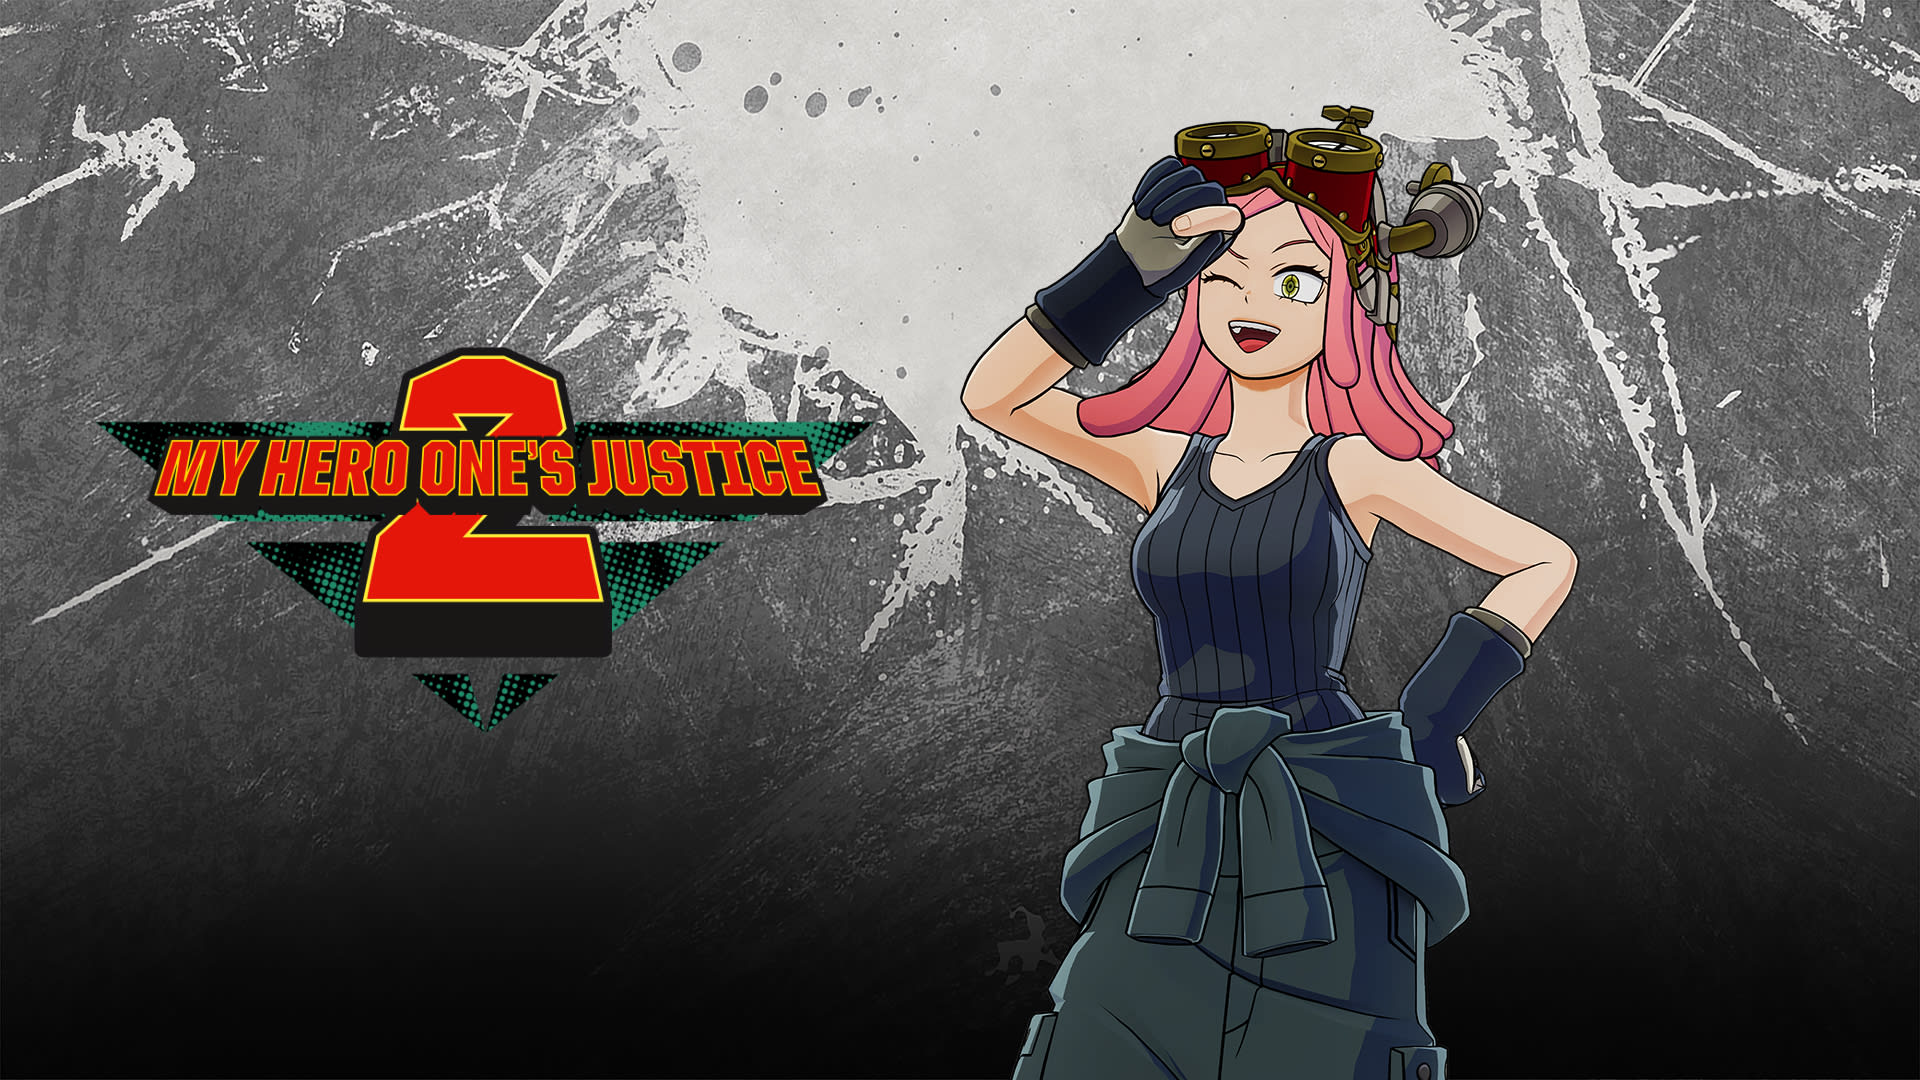 MY HERO ONE'S JUSTICE 2 - DLC 2 : Mei Hatsume